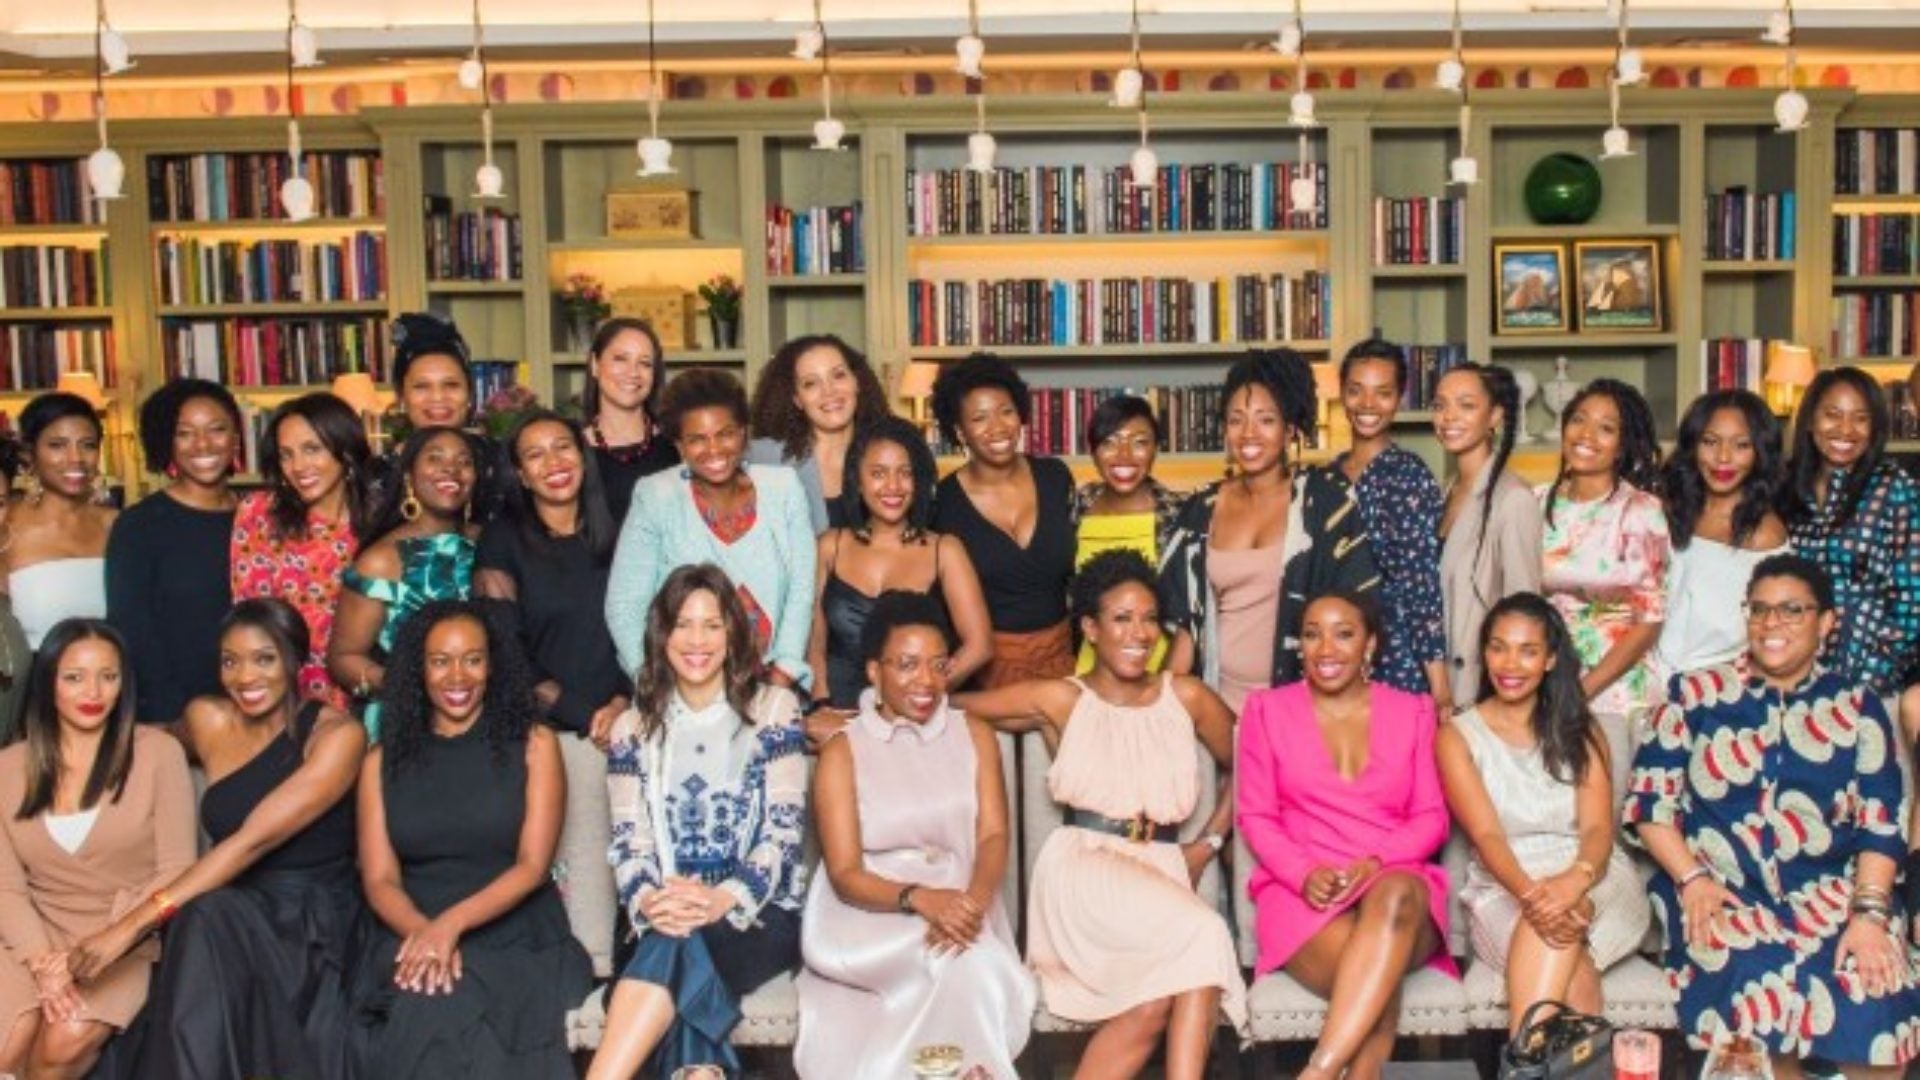 25 Black Women Launches To Celebrate Black Women In The Beauty Business